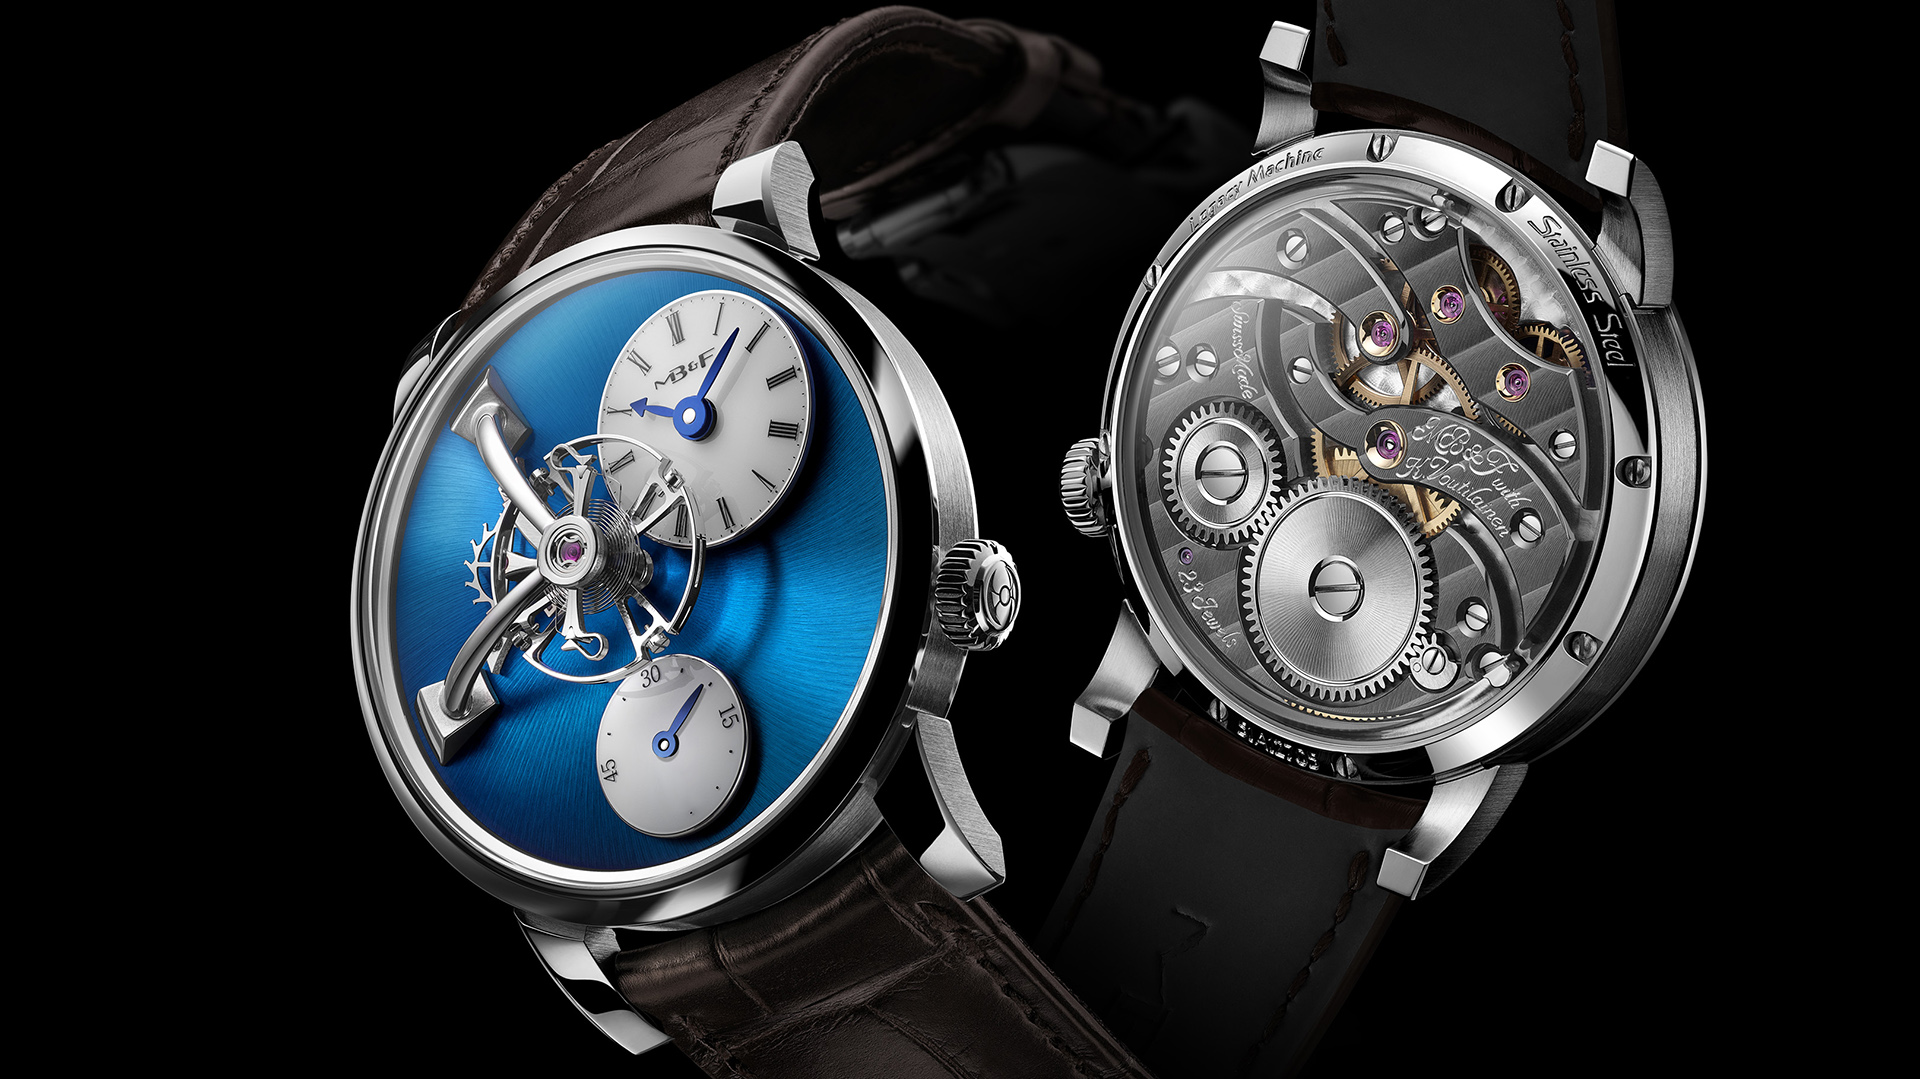 MB&F Refreshes LM101 Watch Series With Three New Models